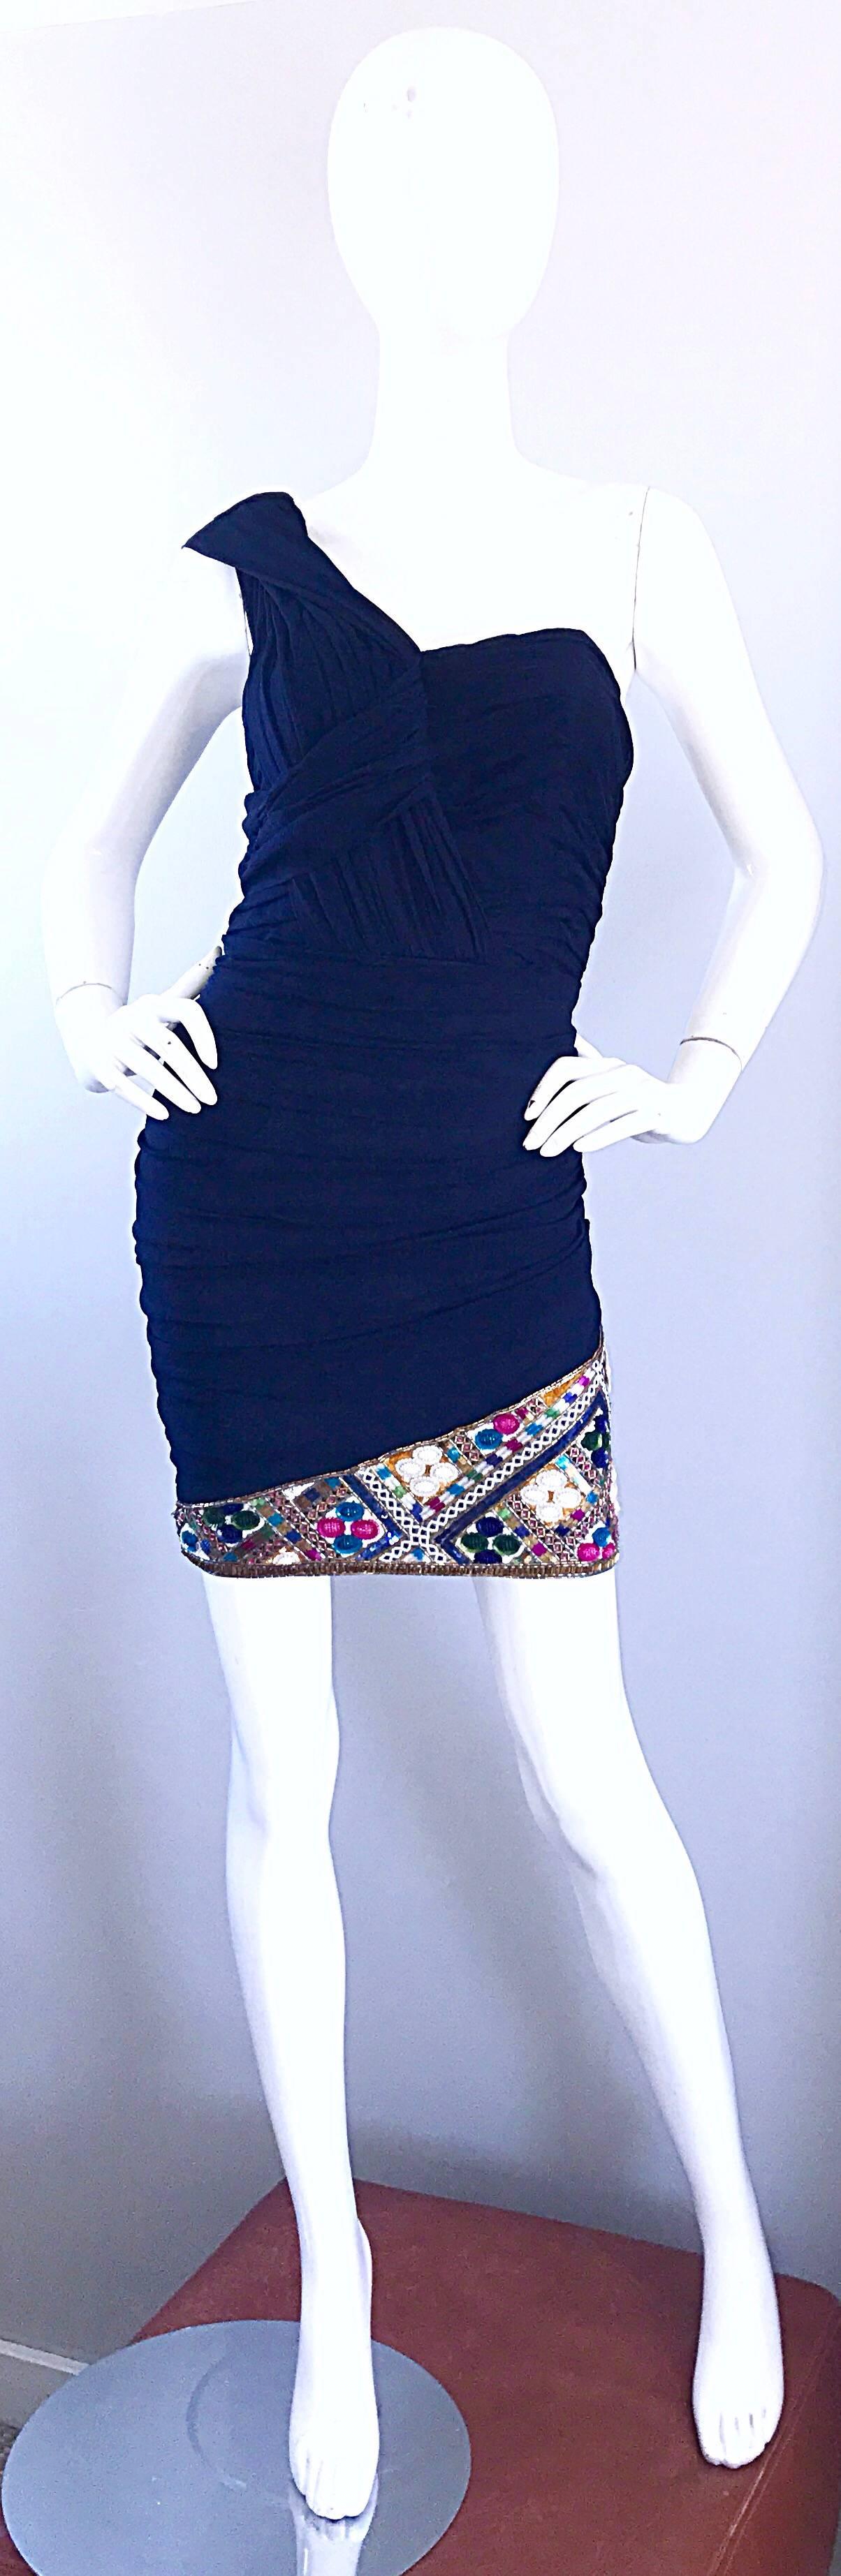 Stunning 1990s PAUL LOUIS ORRIER navy blue silk chiffon one shoulder Grecian toga mini cocktail dress! Flattering ruched bodice and body, with an asymmetrical sleeve that attaches to the back with a snap. Interior boning holds everything in place.